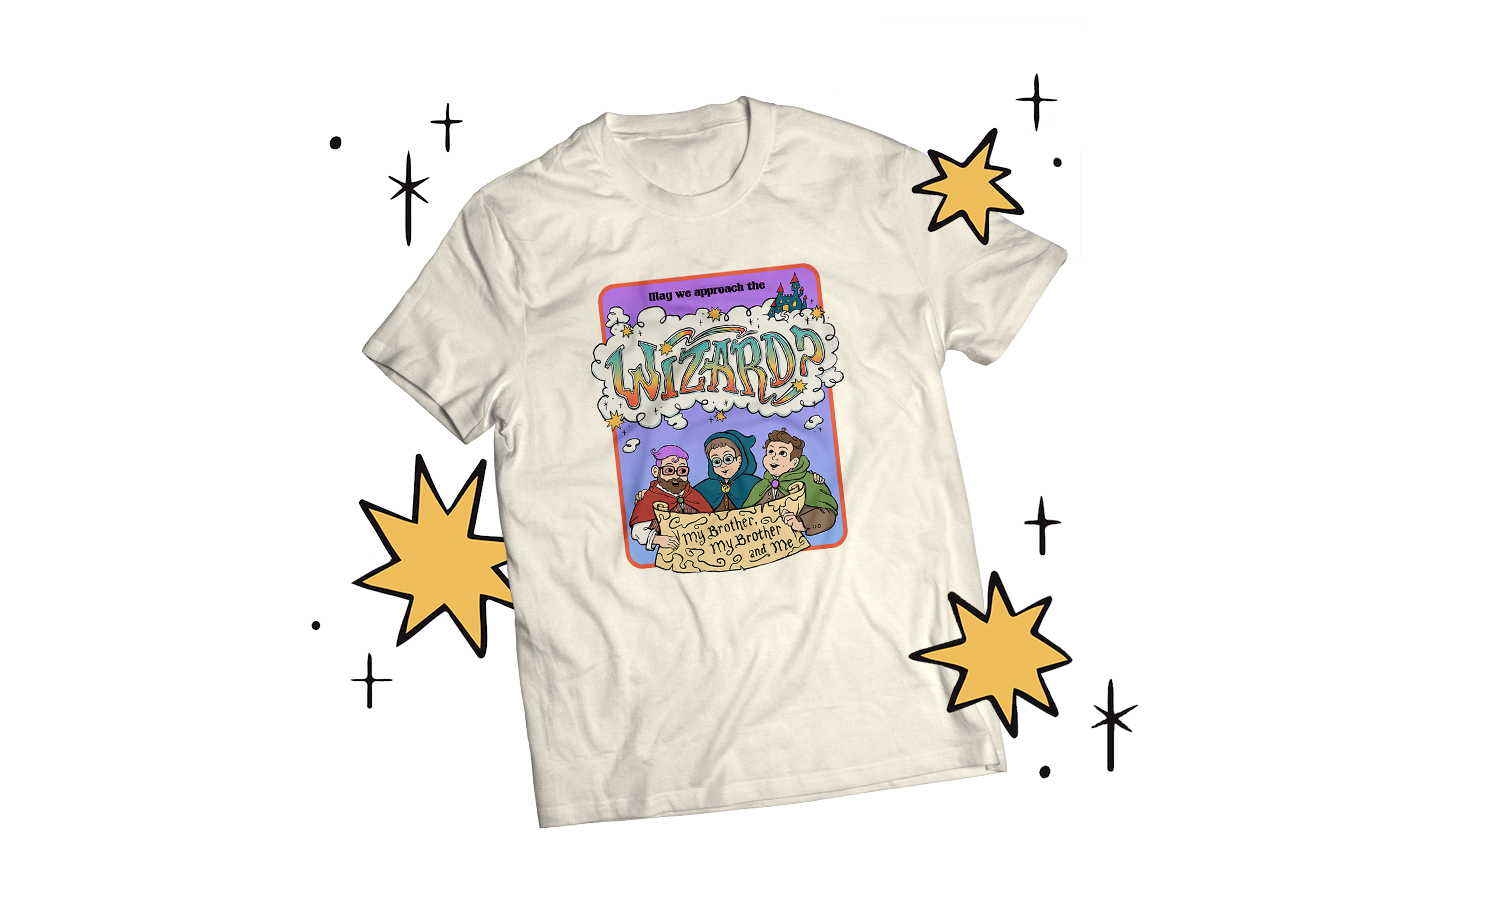 Image the July McElroy merch item. It is a cream colored tee-shirt. On the front is an illustration of the McElroy brothers in colorful cloaks holding a scroll between them with a red border and purple gradient background. The scroll says, “My Brother, My Brother and Me.” Above them, the shirt says, “May we approach the Wizard?” “Wizard” is written in colorful, funky text inside a thought cloud above the brothers’ heads. Around the shirt are sparkles and yellow bursts of color.